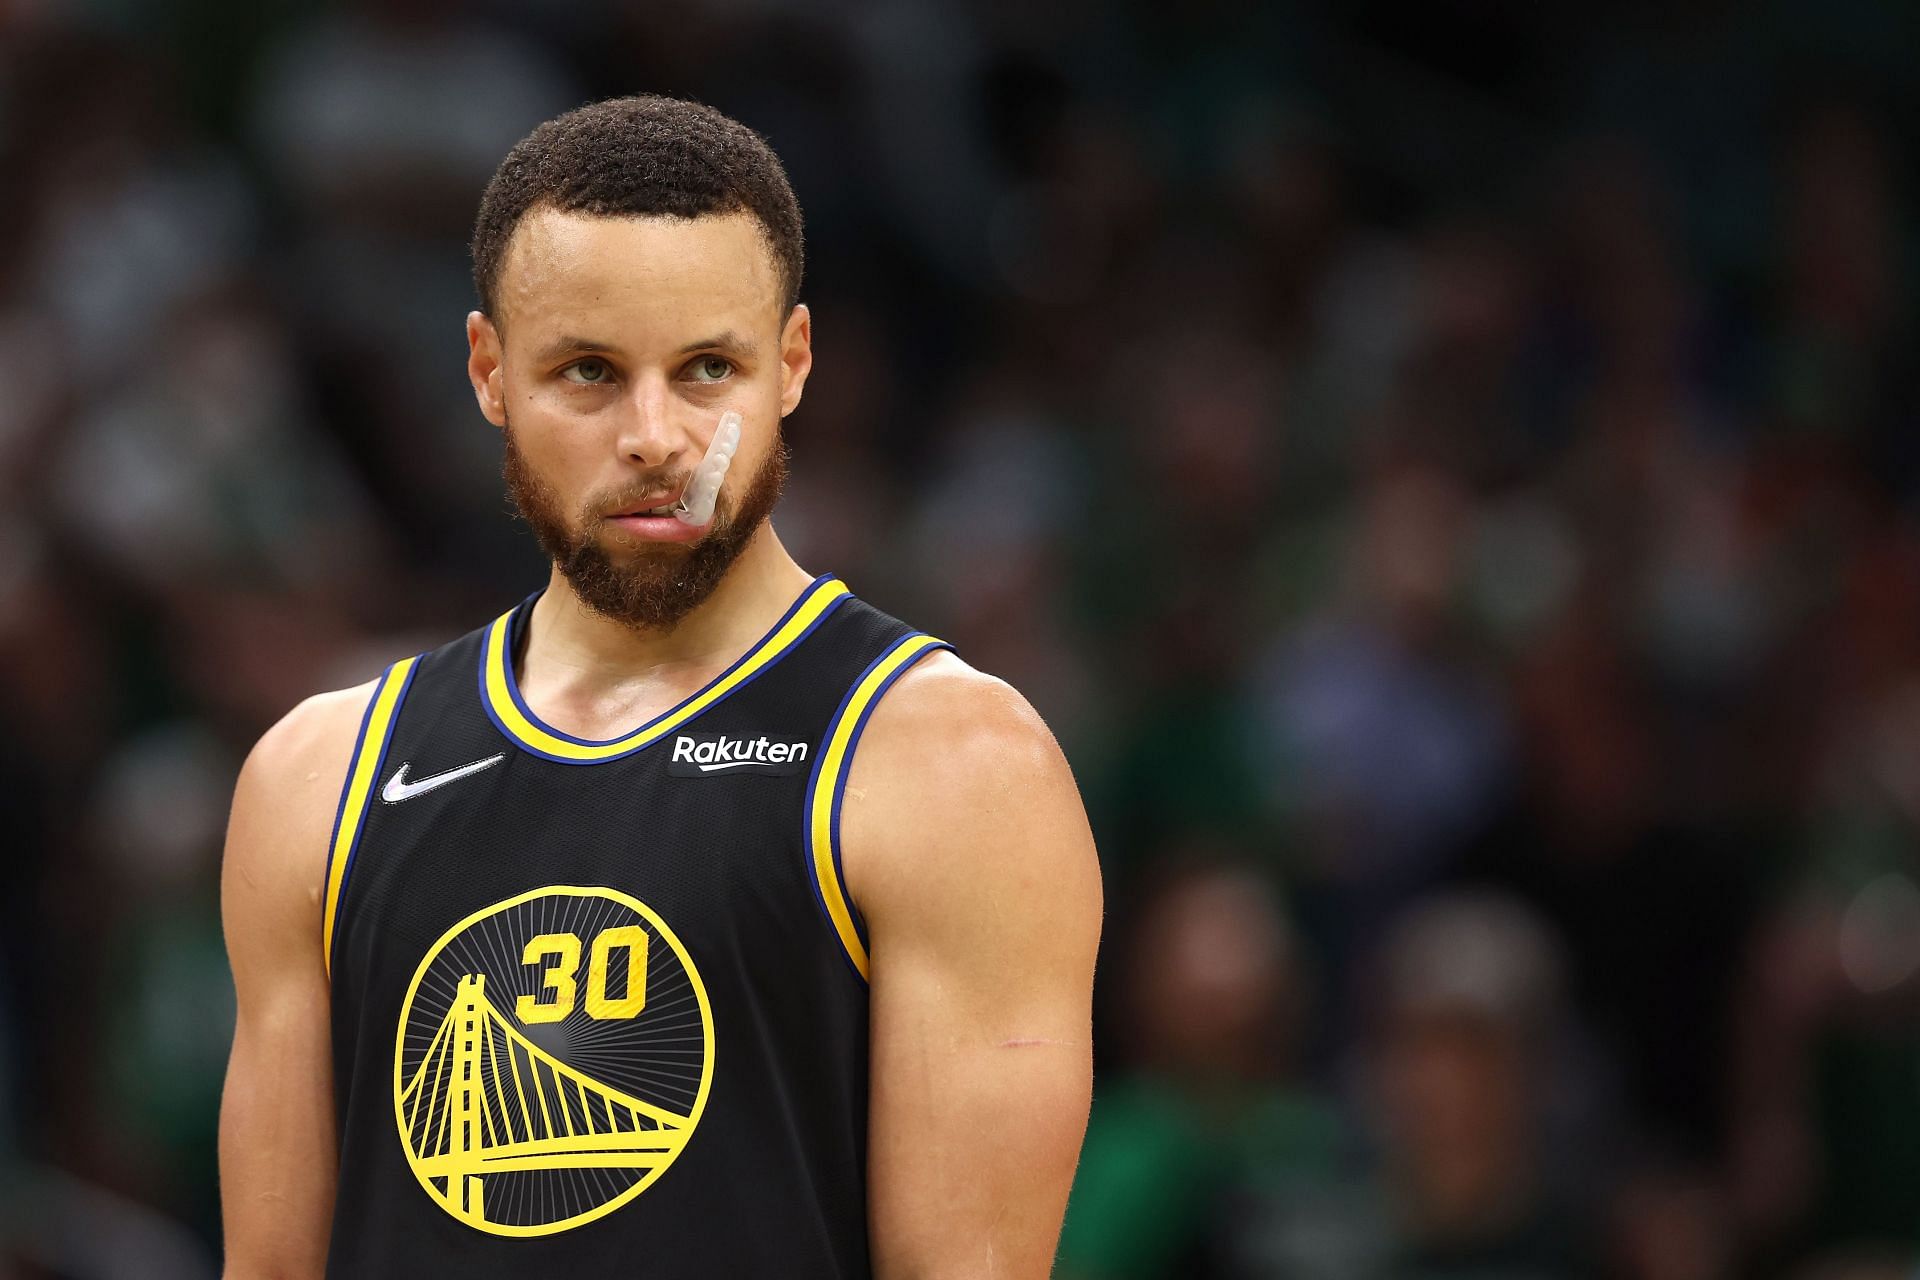 Steph Curry of the Golden State Warriors in the 2022 NBA Finals